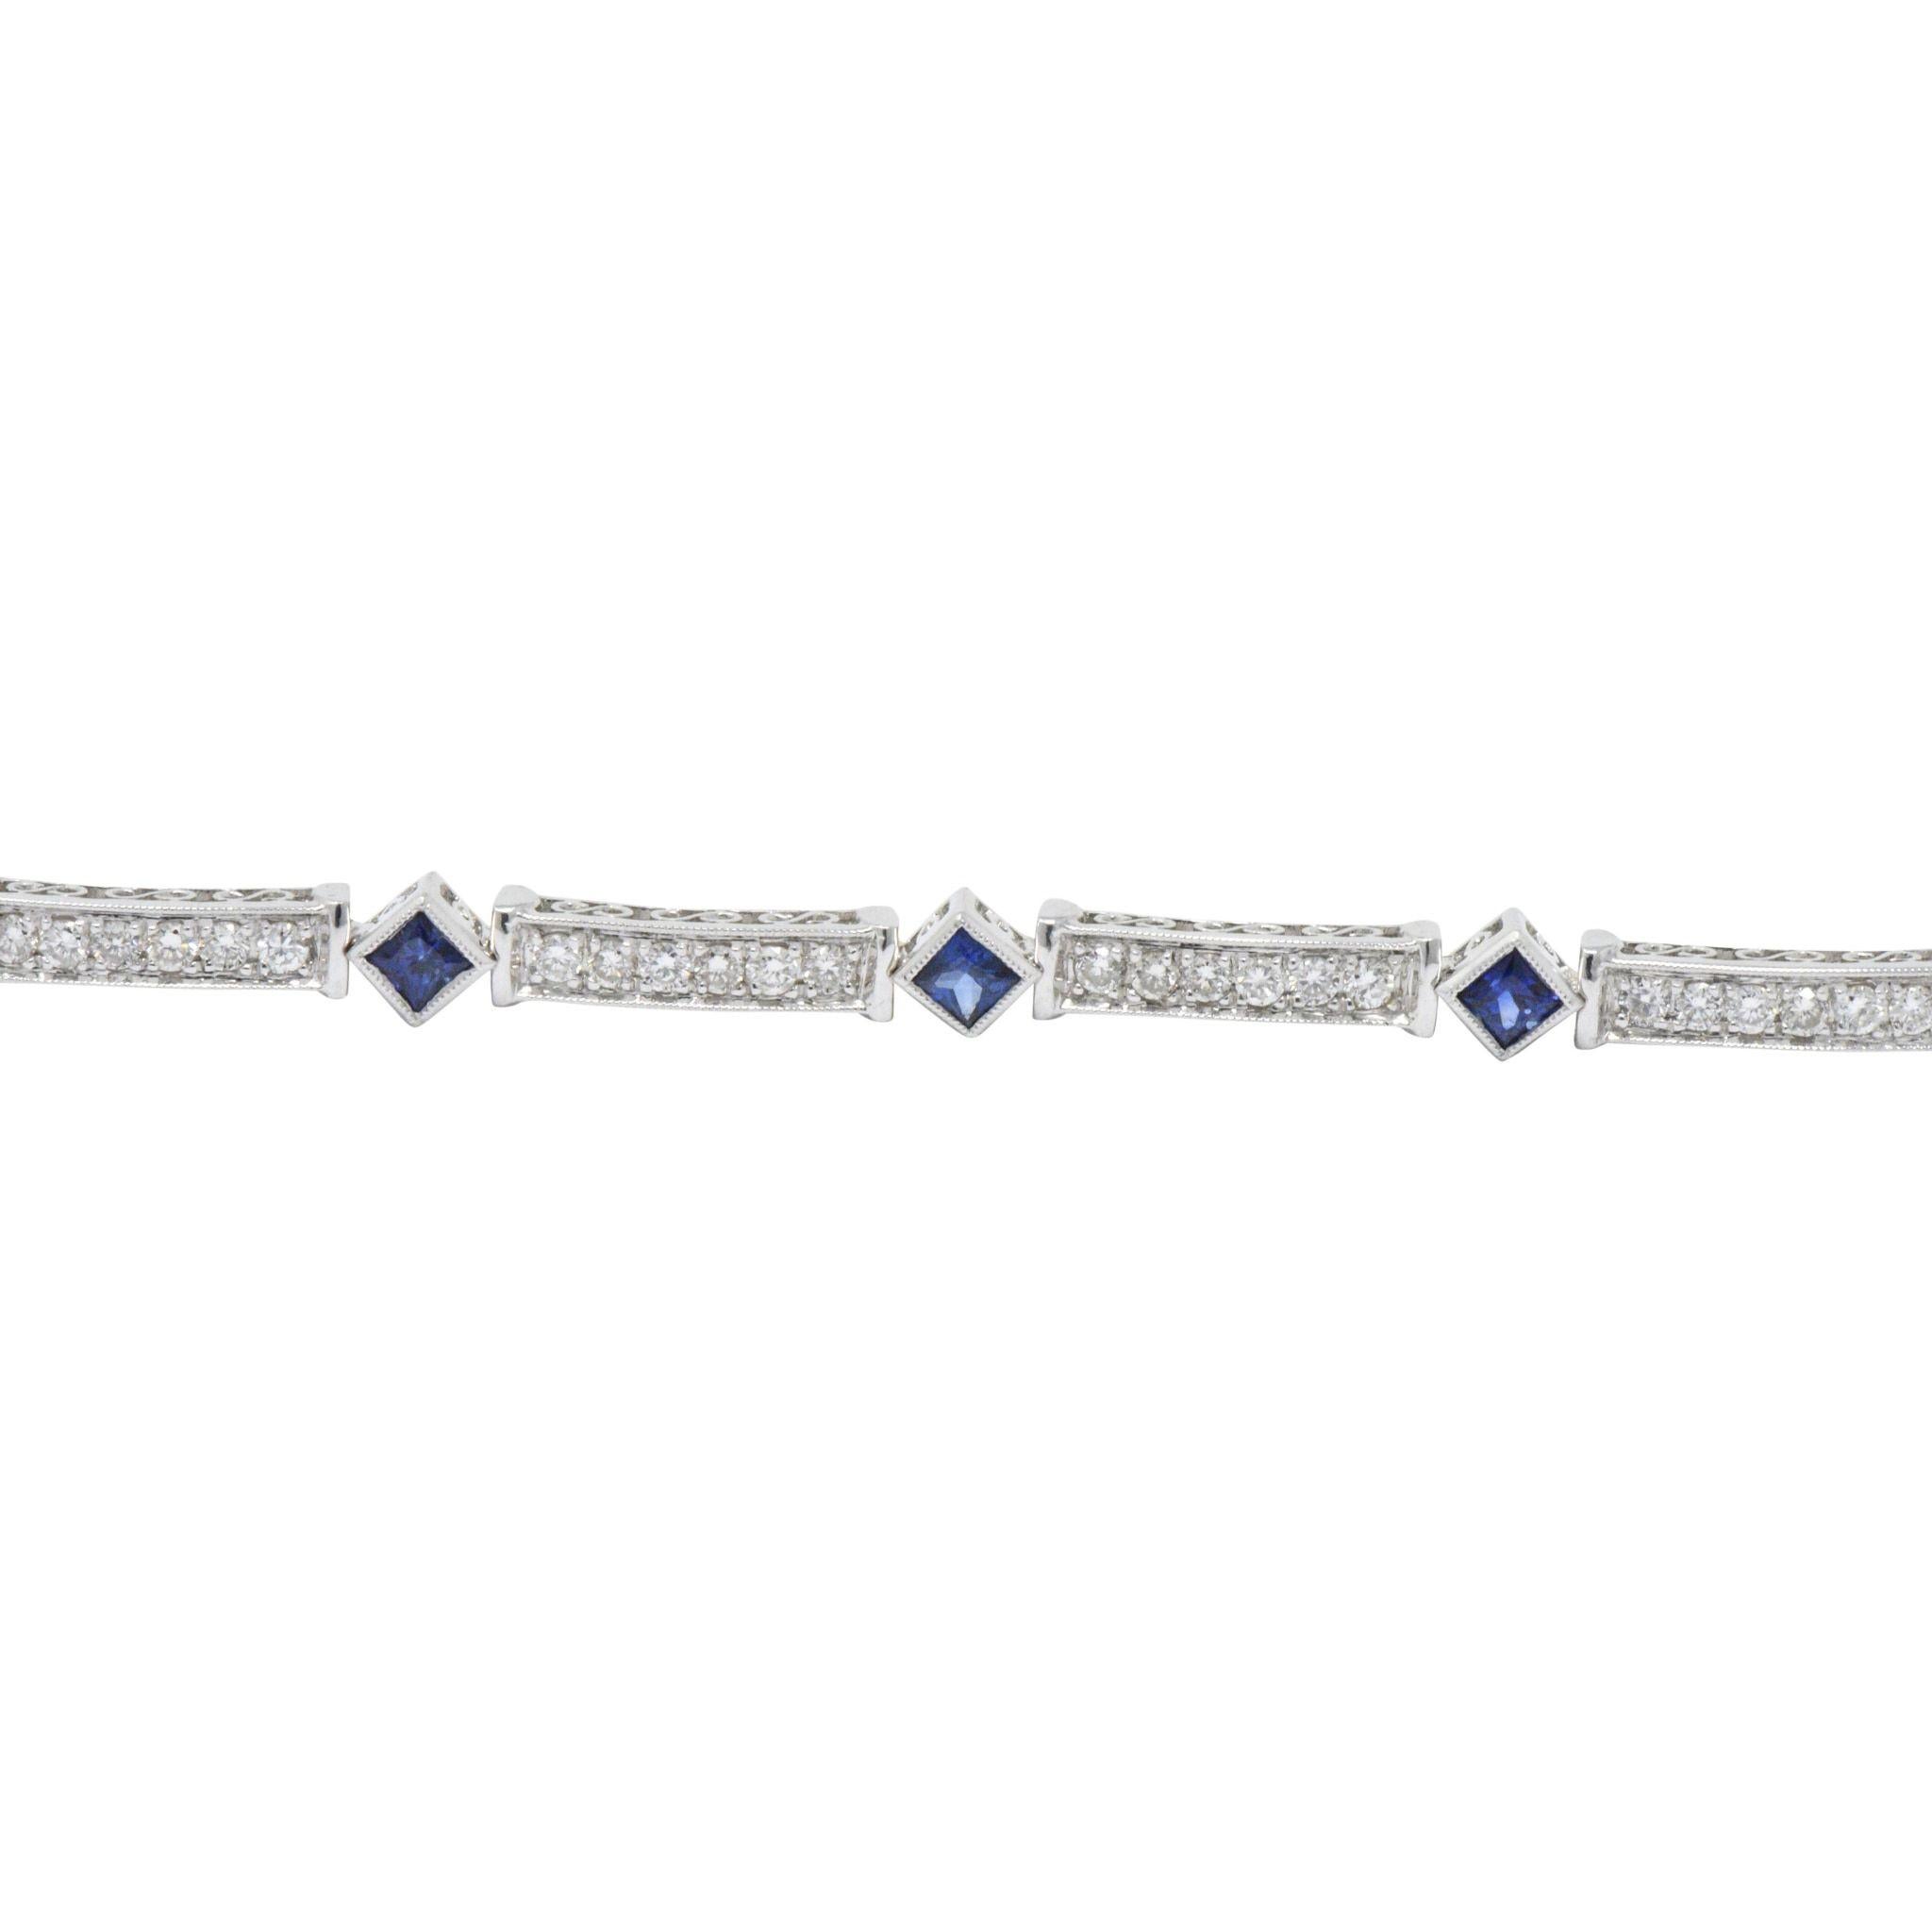 Line bracelet comprised of rectangular diamond links alternating with square cut sapphire spacer links

Bead set round brilliant cut diamonds weigh in total 1.18 carats, G/H color with VS to SI clarity

Bezel set sapphire weigh 1.33 carats total;